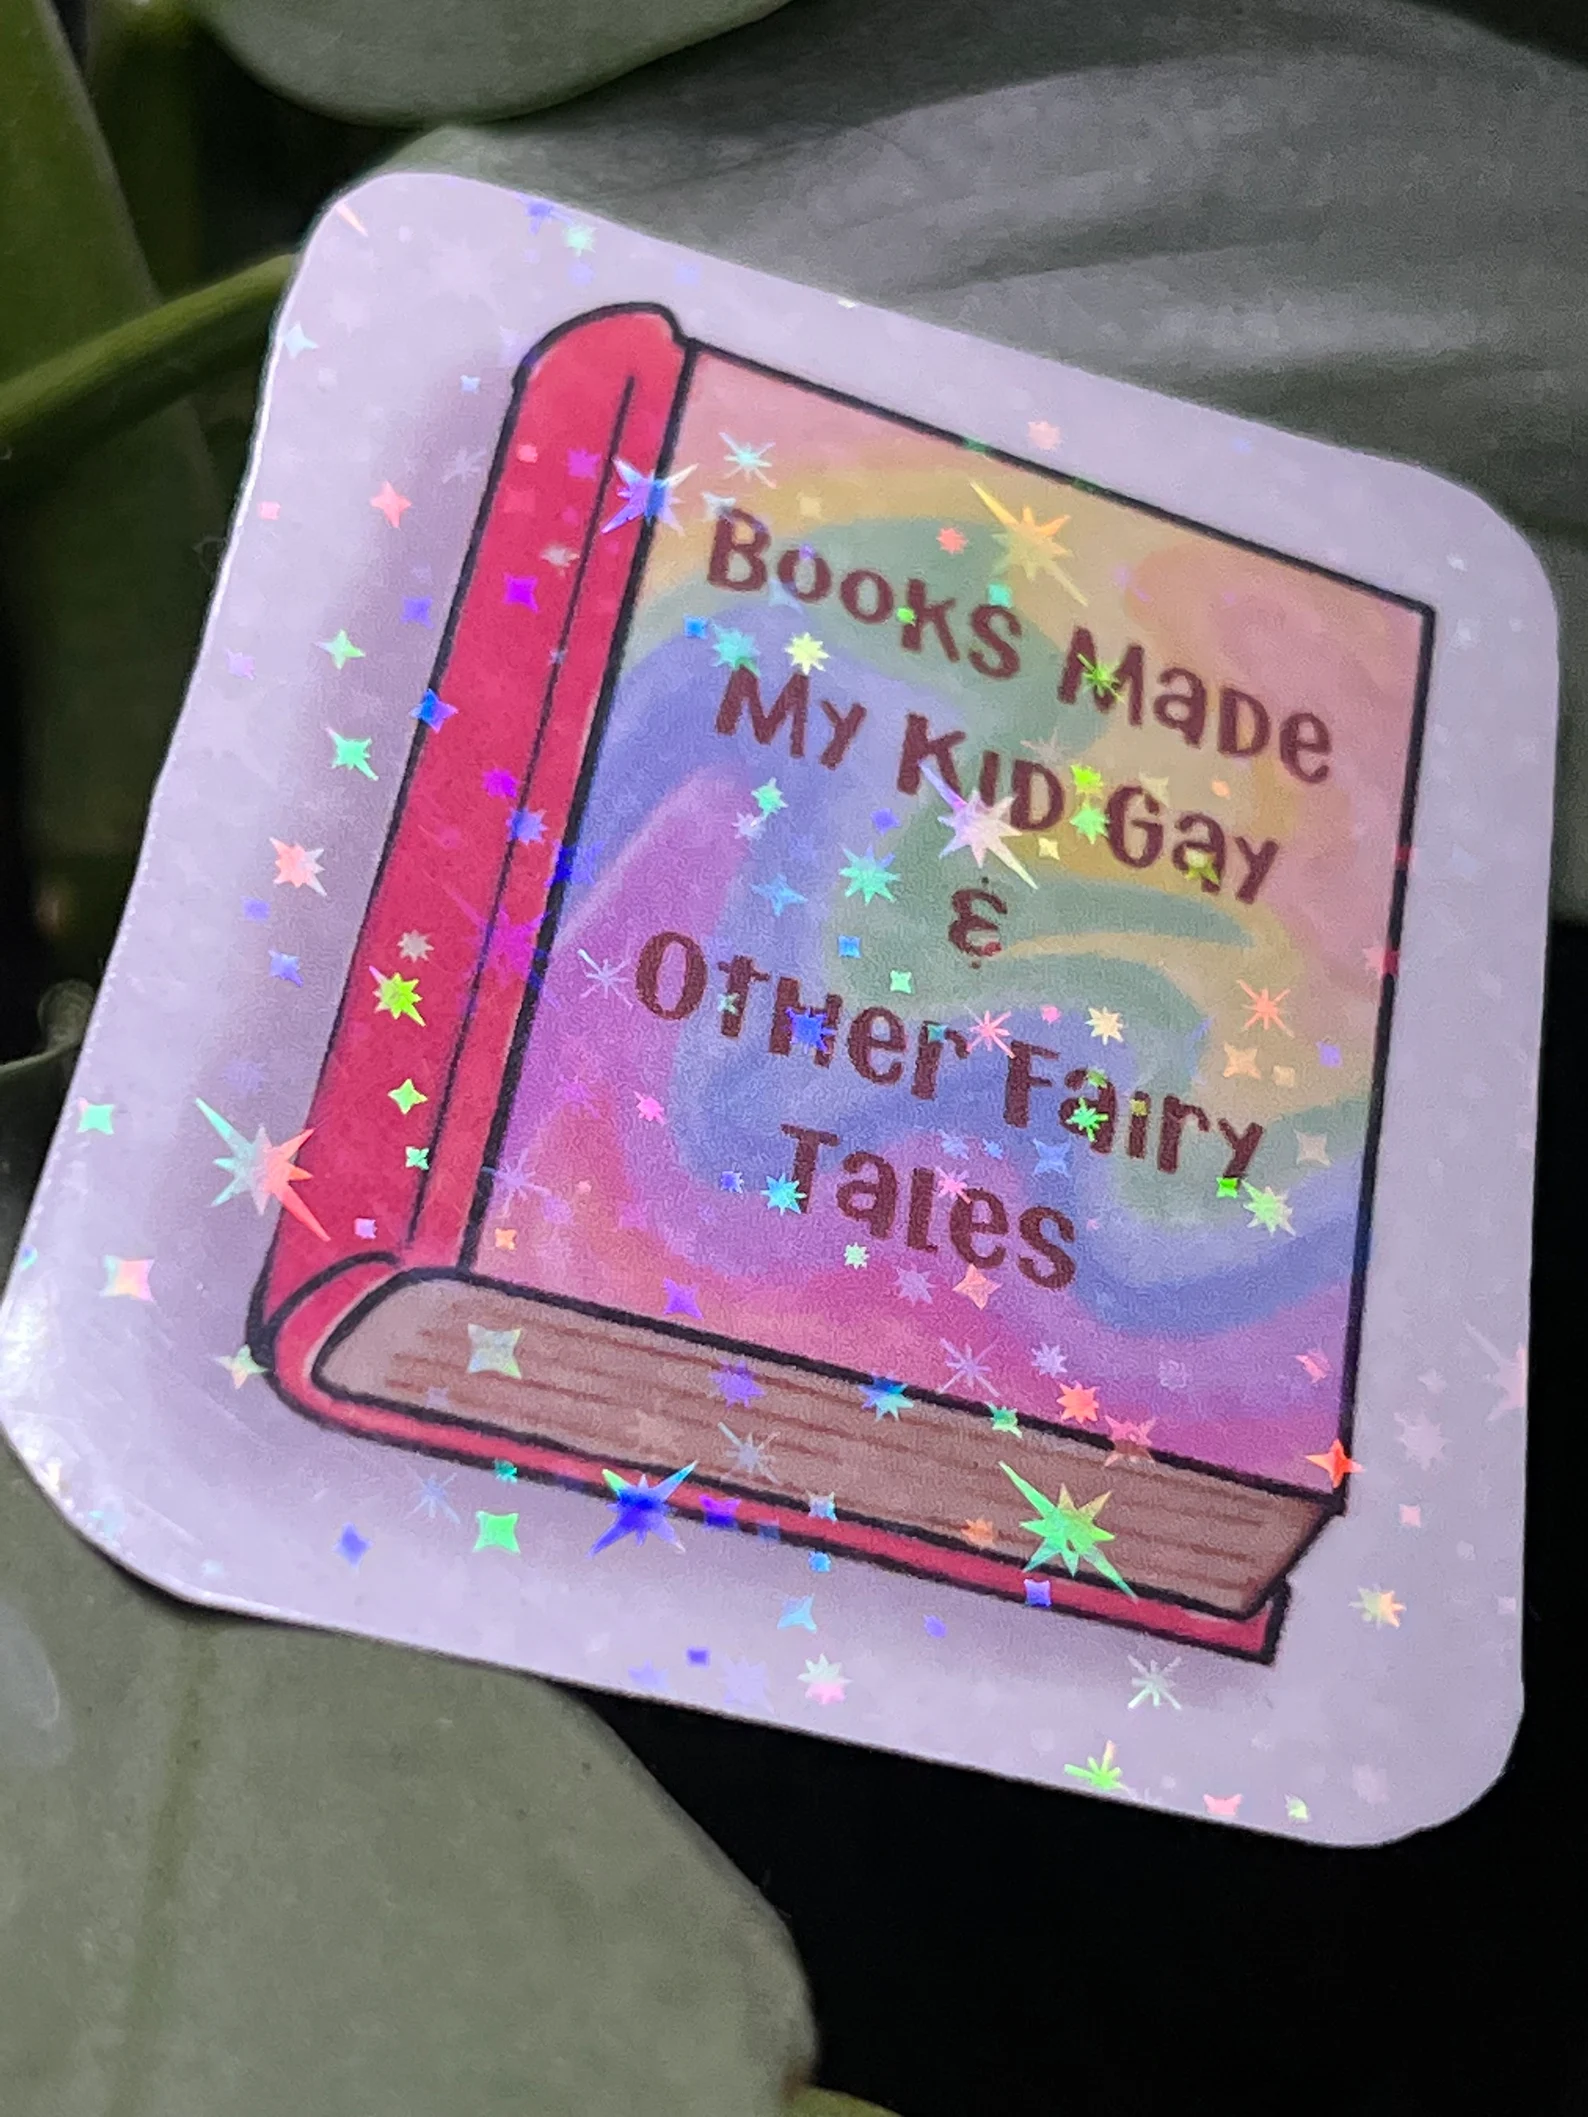 shiny sticker that says "books made me gay and other fairy tales."